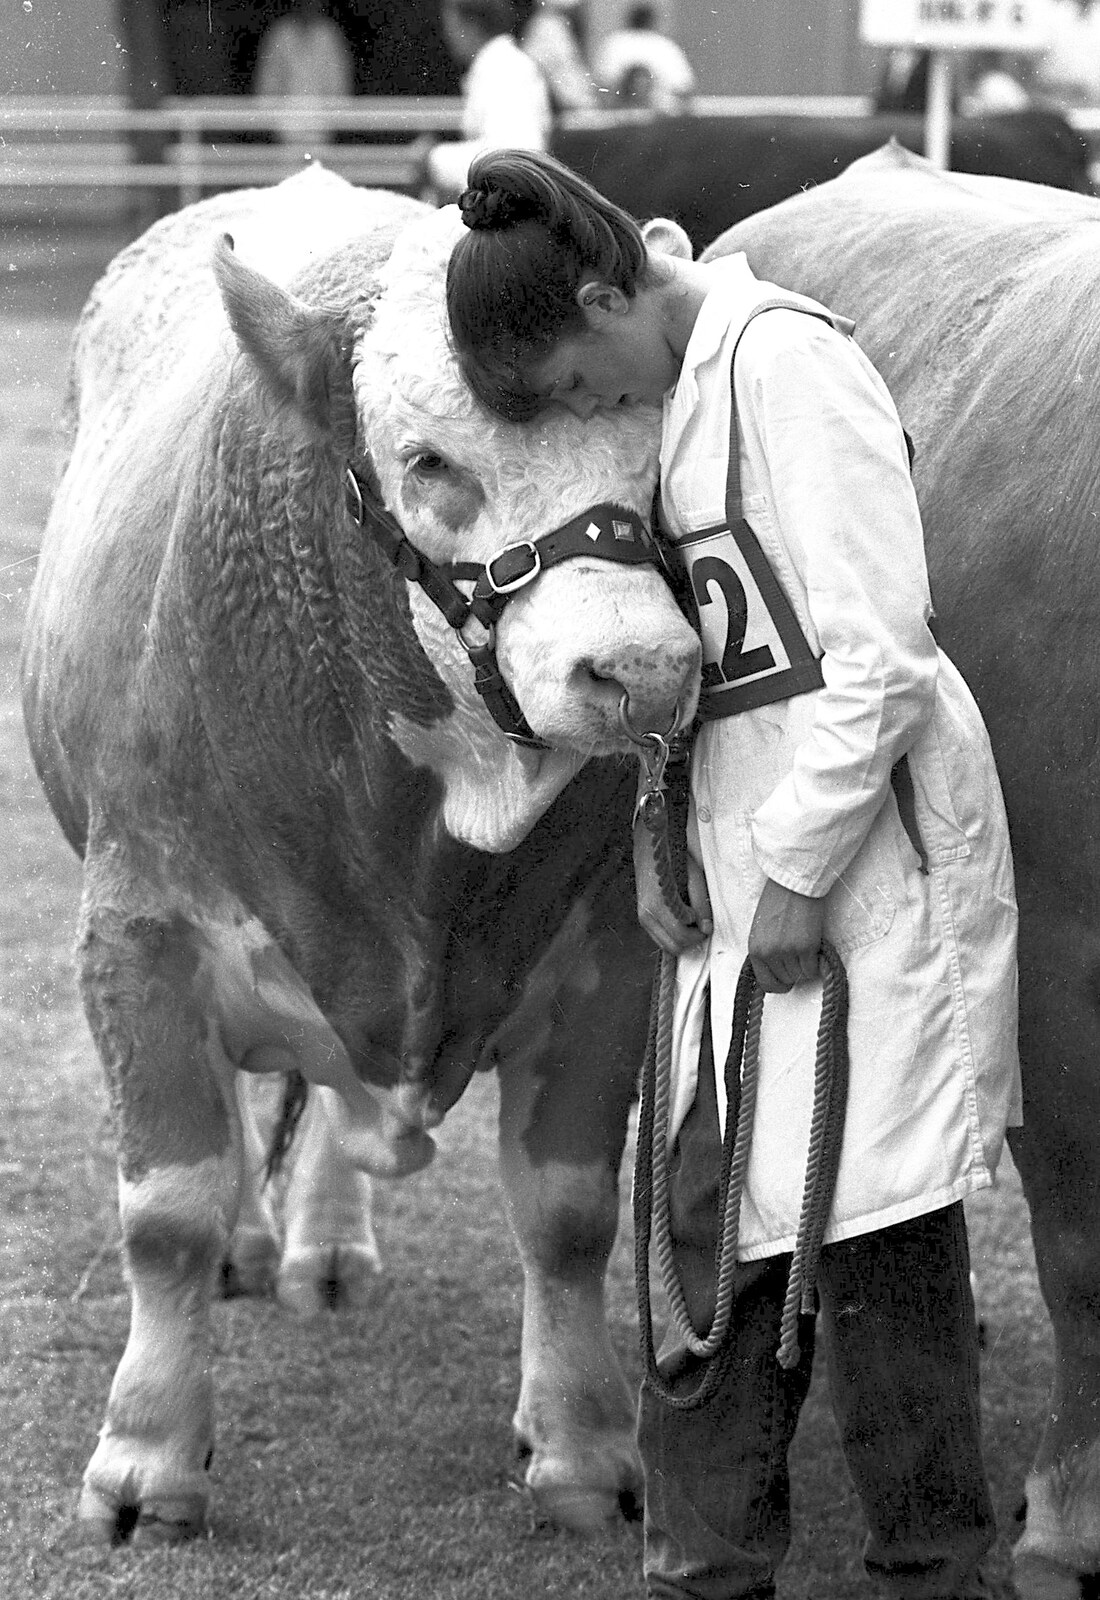 The Royal Norfolk Show, Costessey, Norwich - June 20th 1994: More hugs for the bull